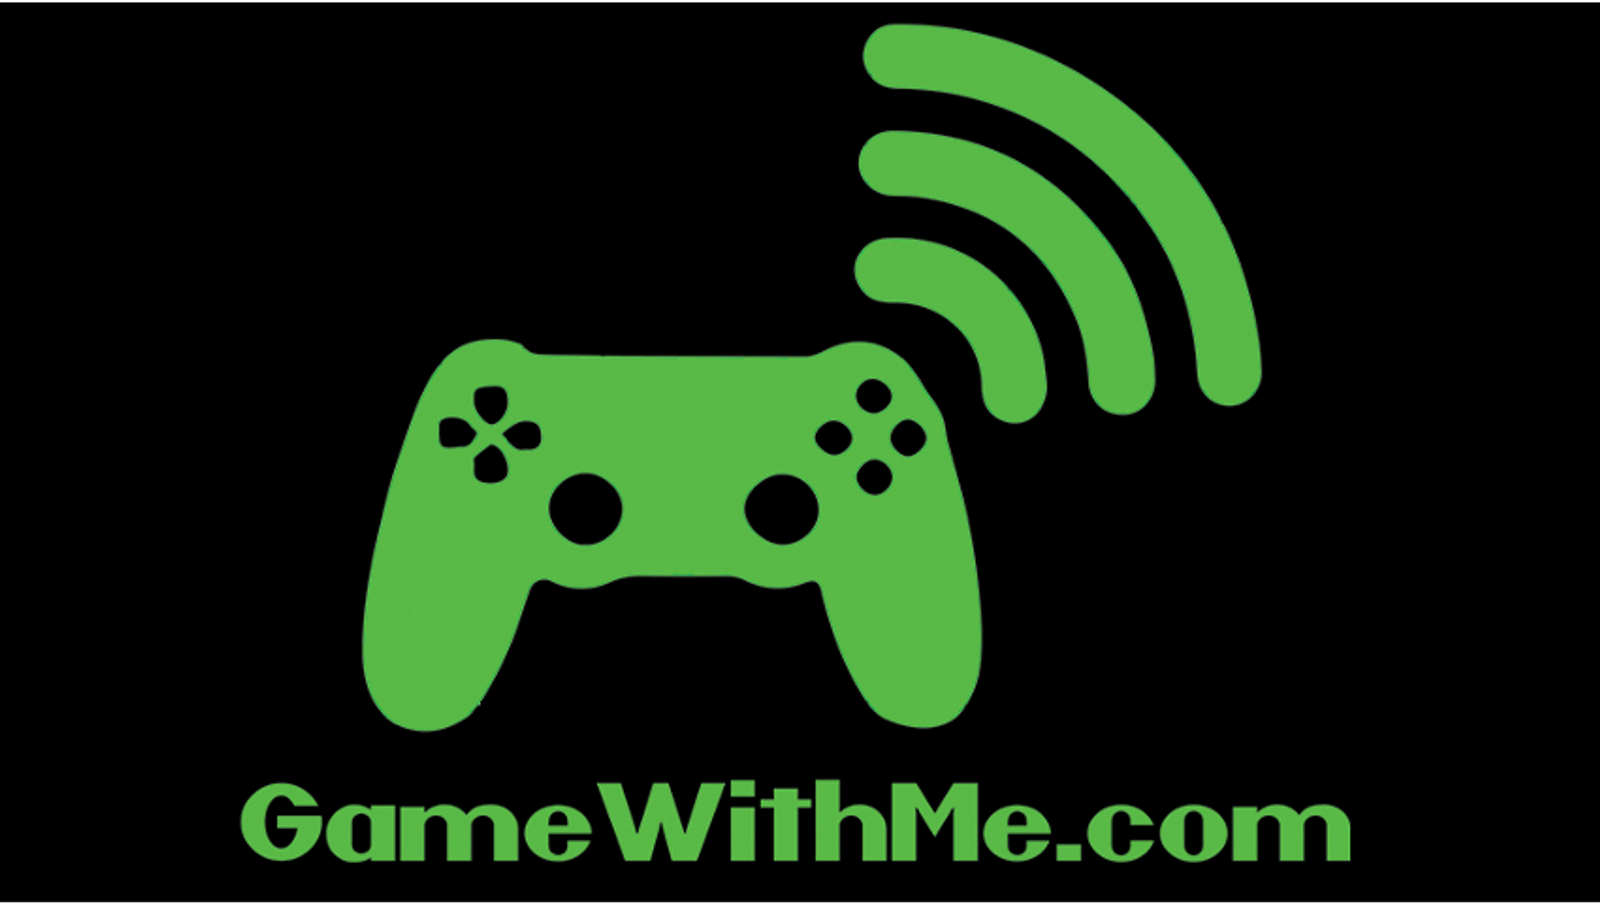 GameWithMe.com Launches With Uncensored Gaming